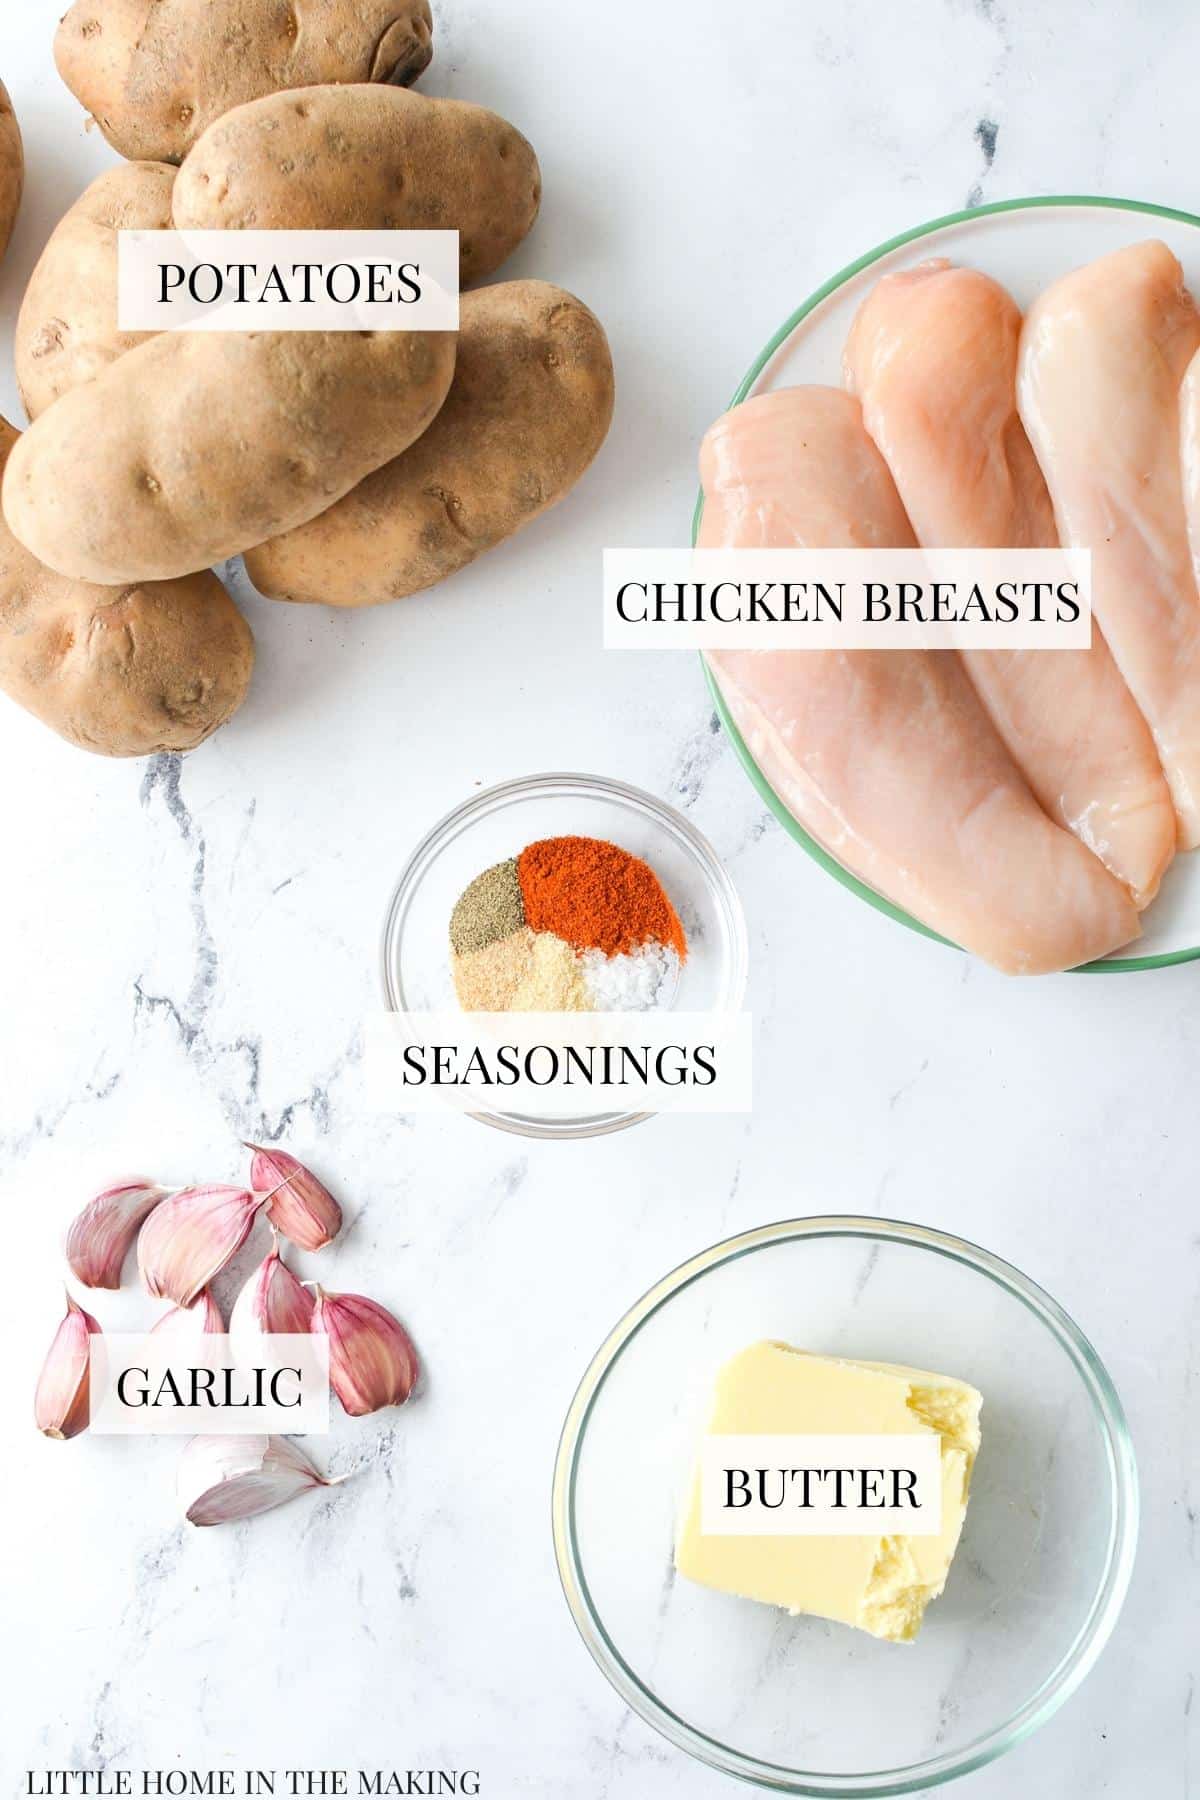 The ingredients needed to make chicken and potatoes.